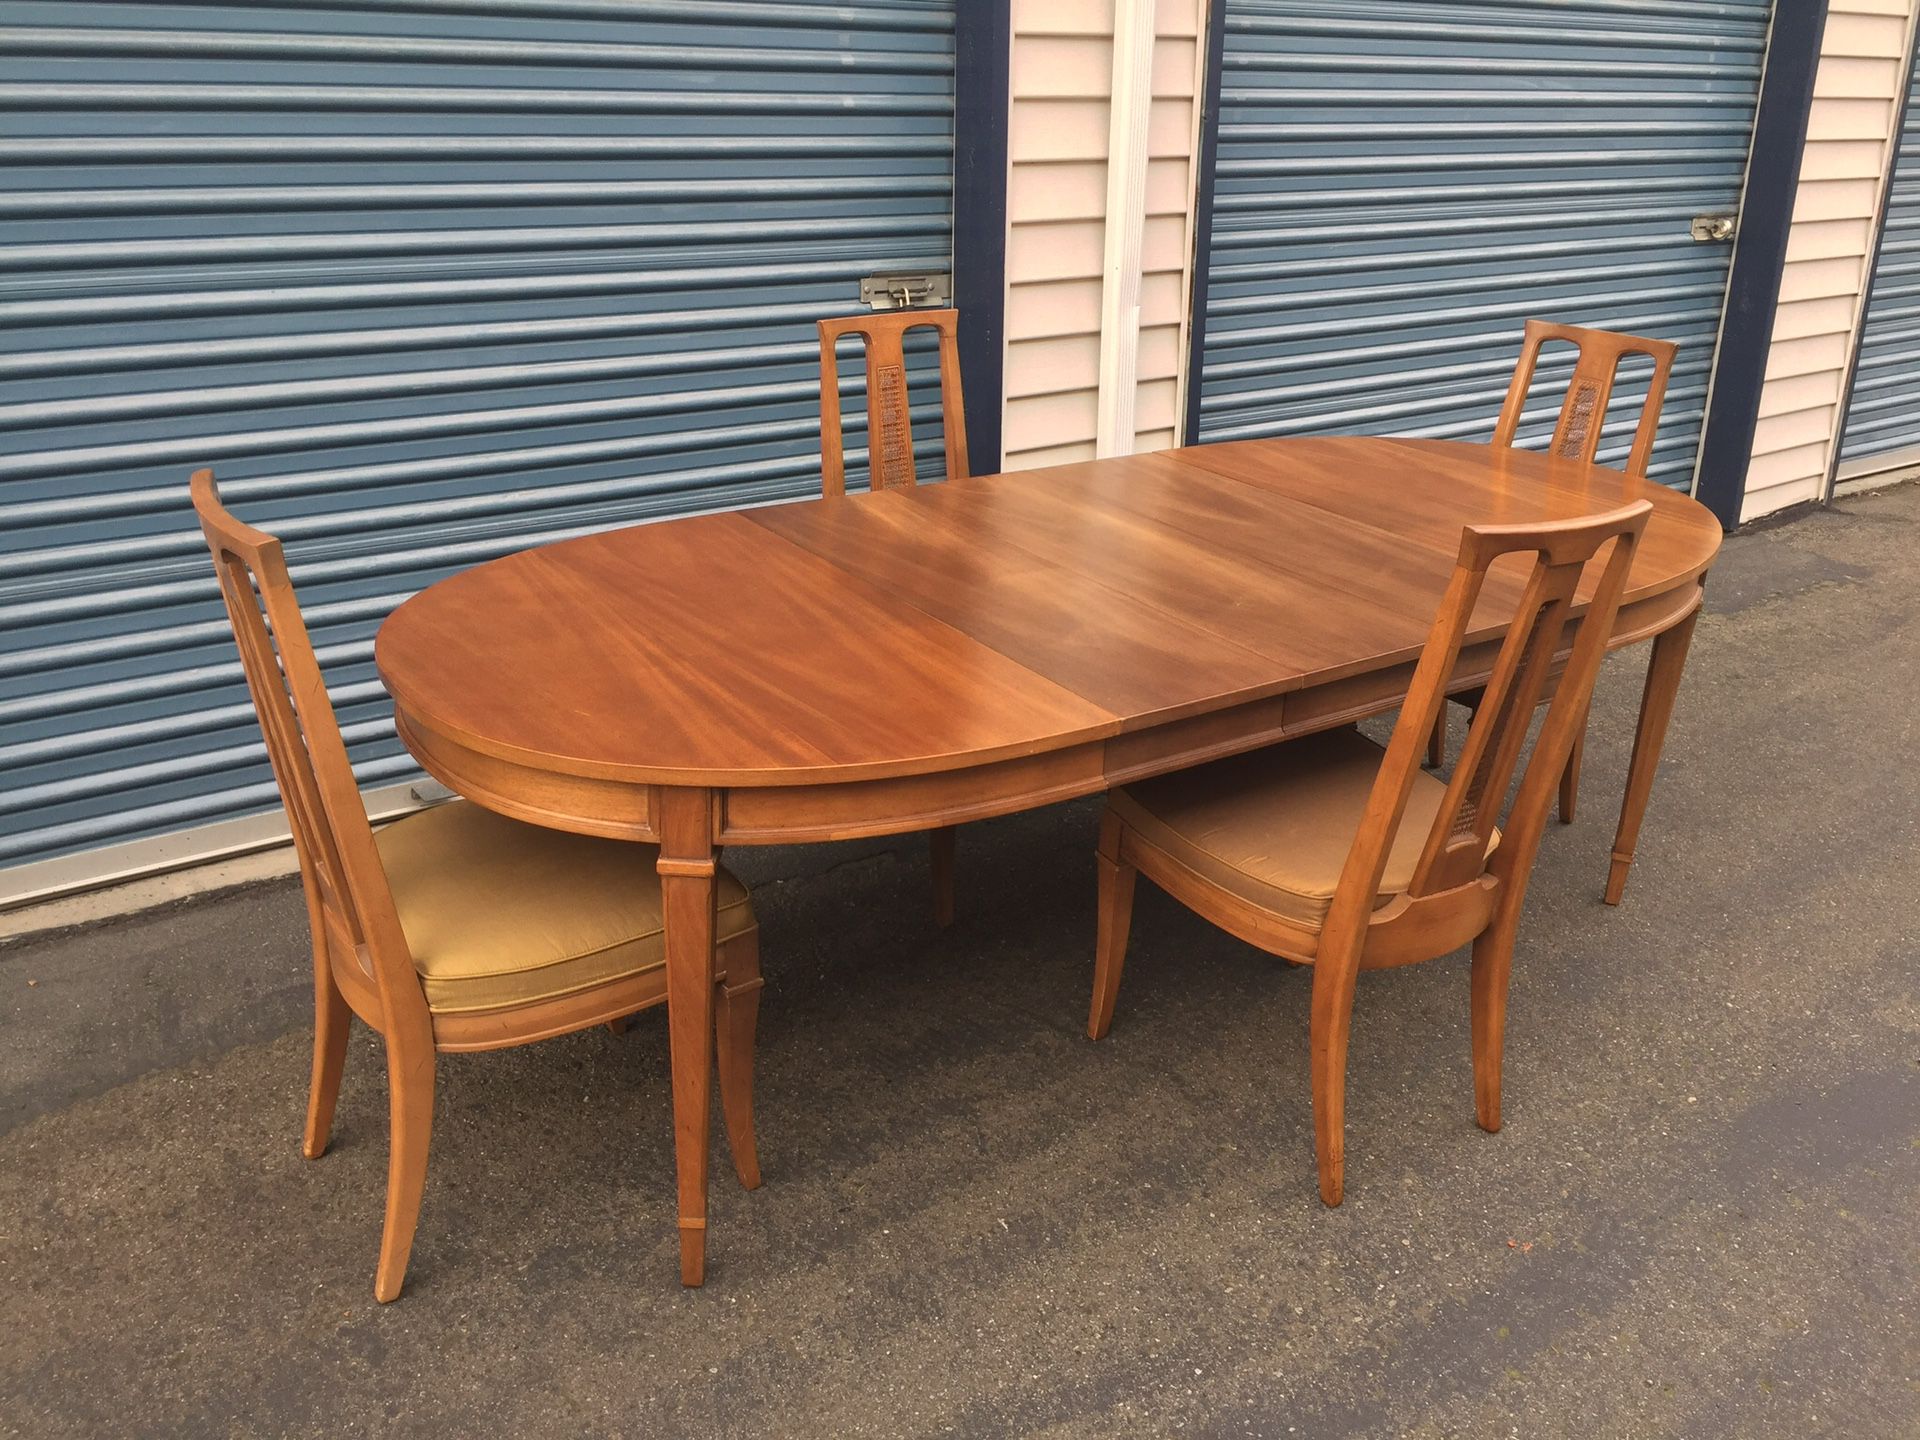 Vintage Drexel Triune Dining Room Table Set. Delivery Available